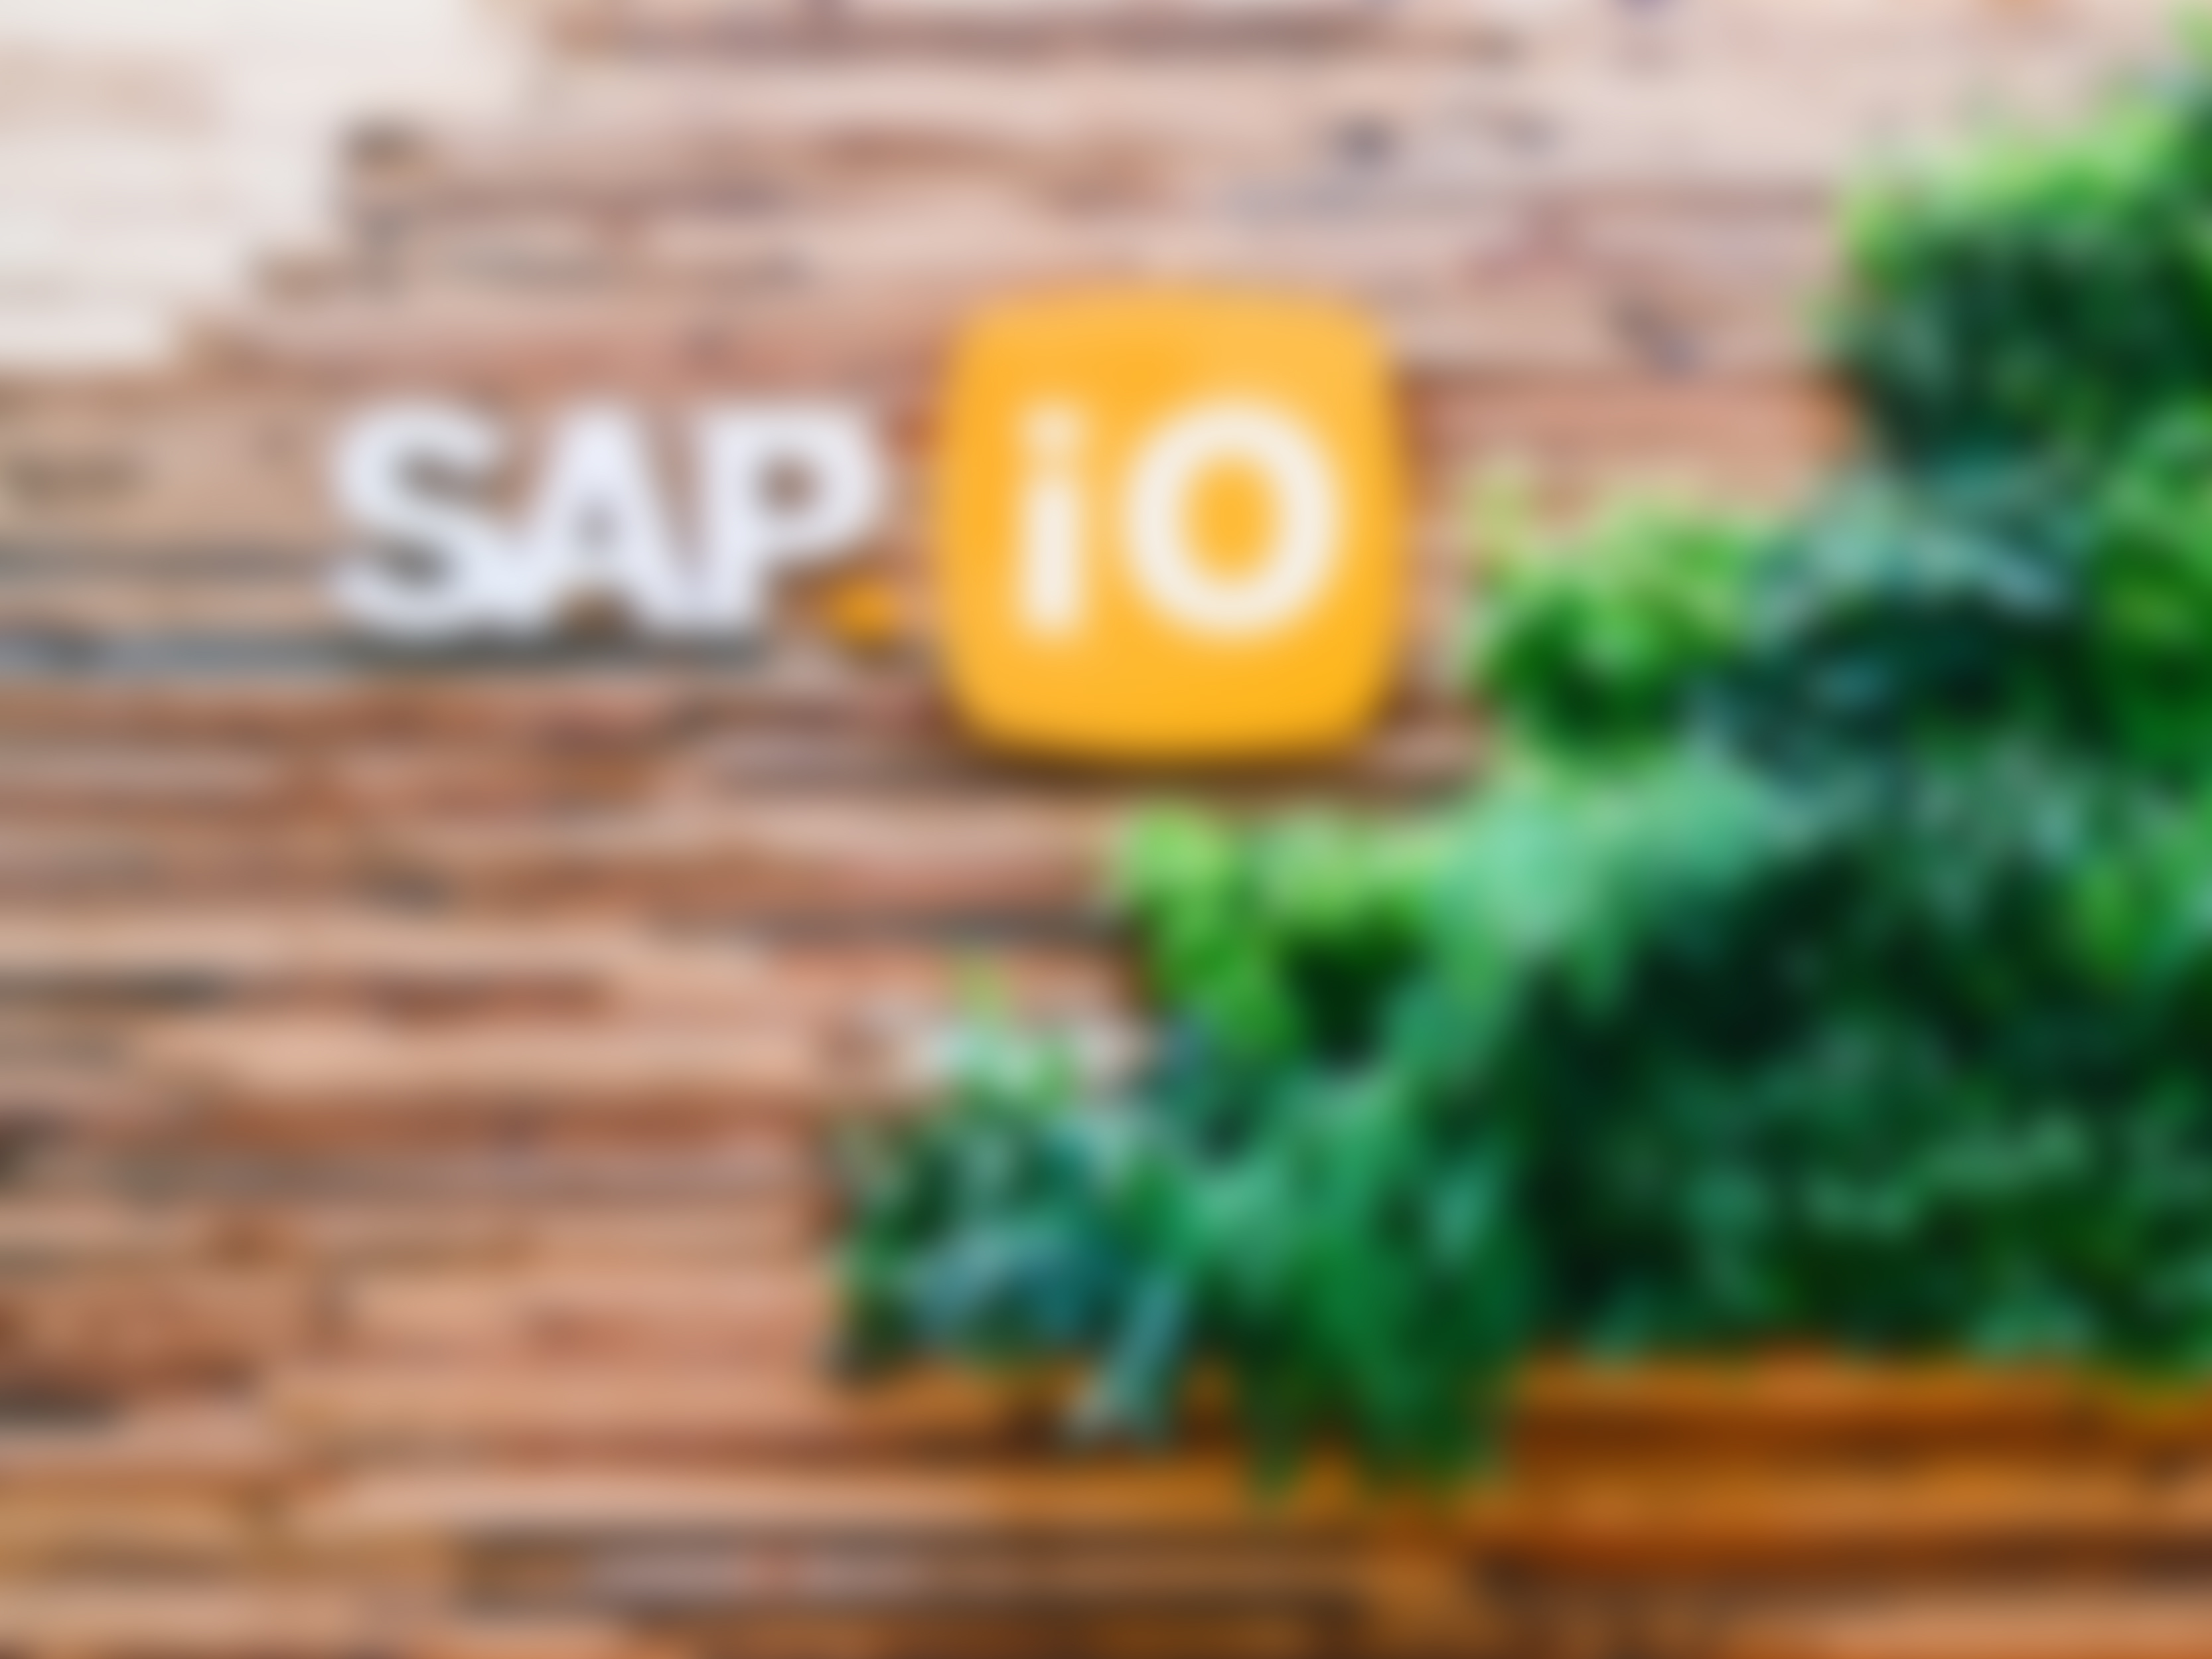 SAP set to select startups for accelerator program in Singapore